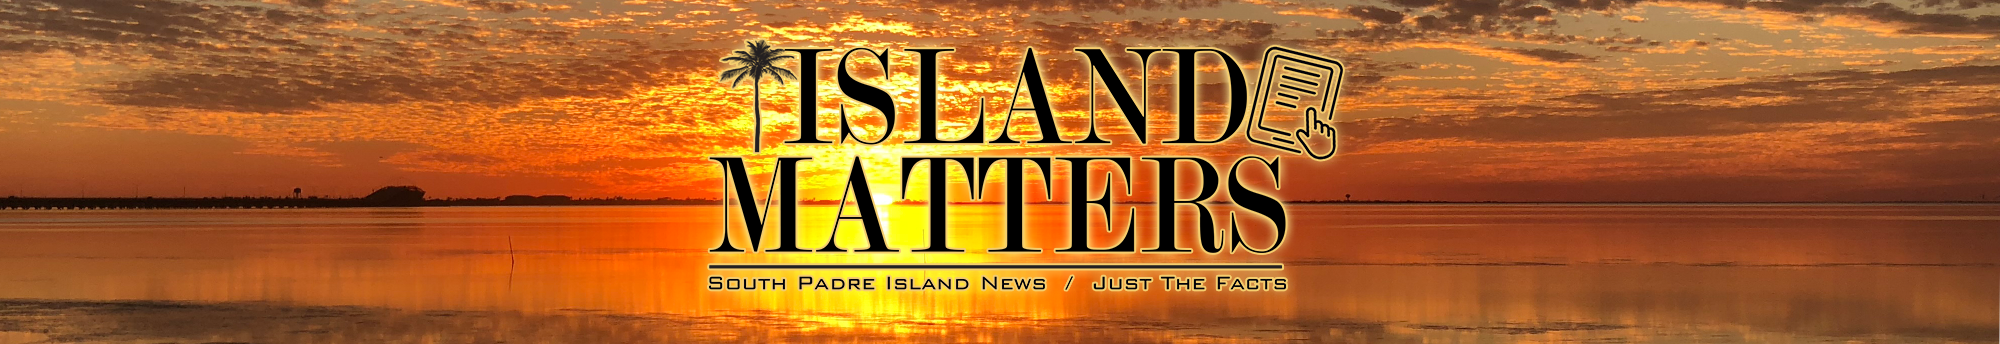 Island Matters Contact Page Banner